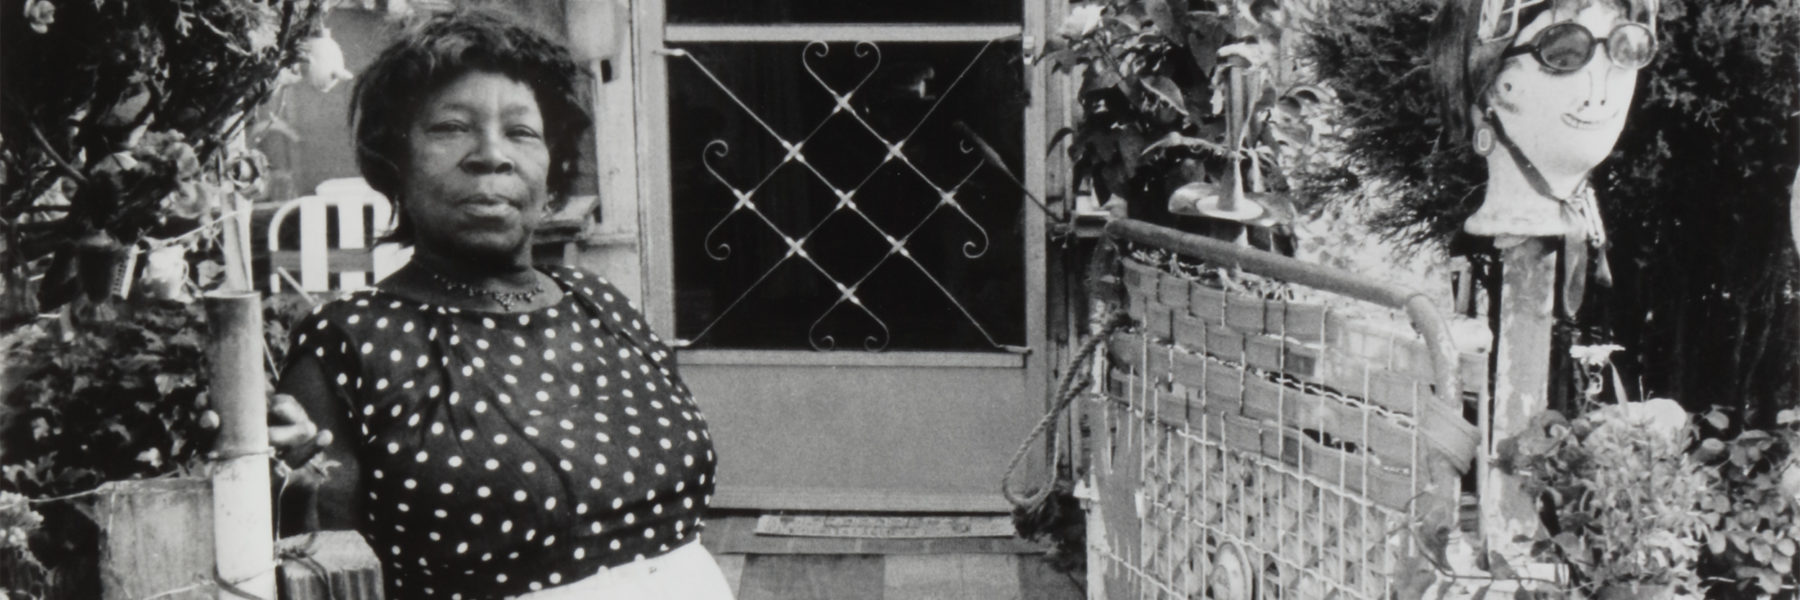 Nellie Mae Rowe wears a black shirt with white polkadots and stands in front of her home to the left of her front door. To the right of the door is a doll head wearing sunglasses perched on a post.